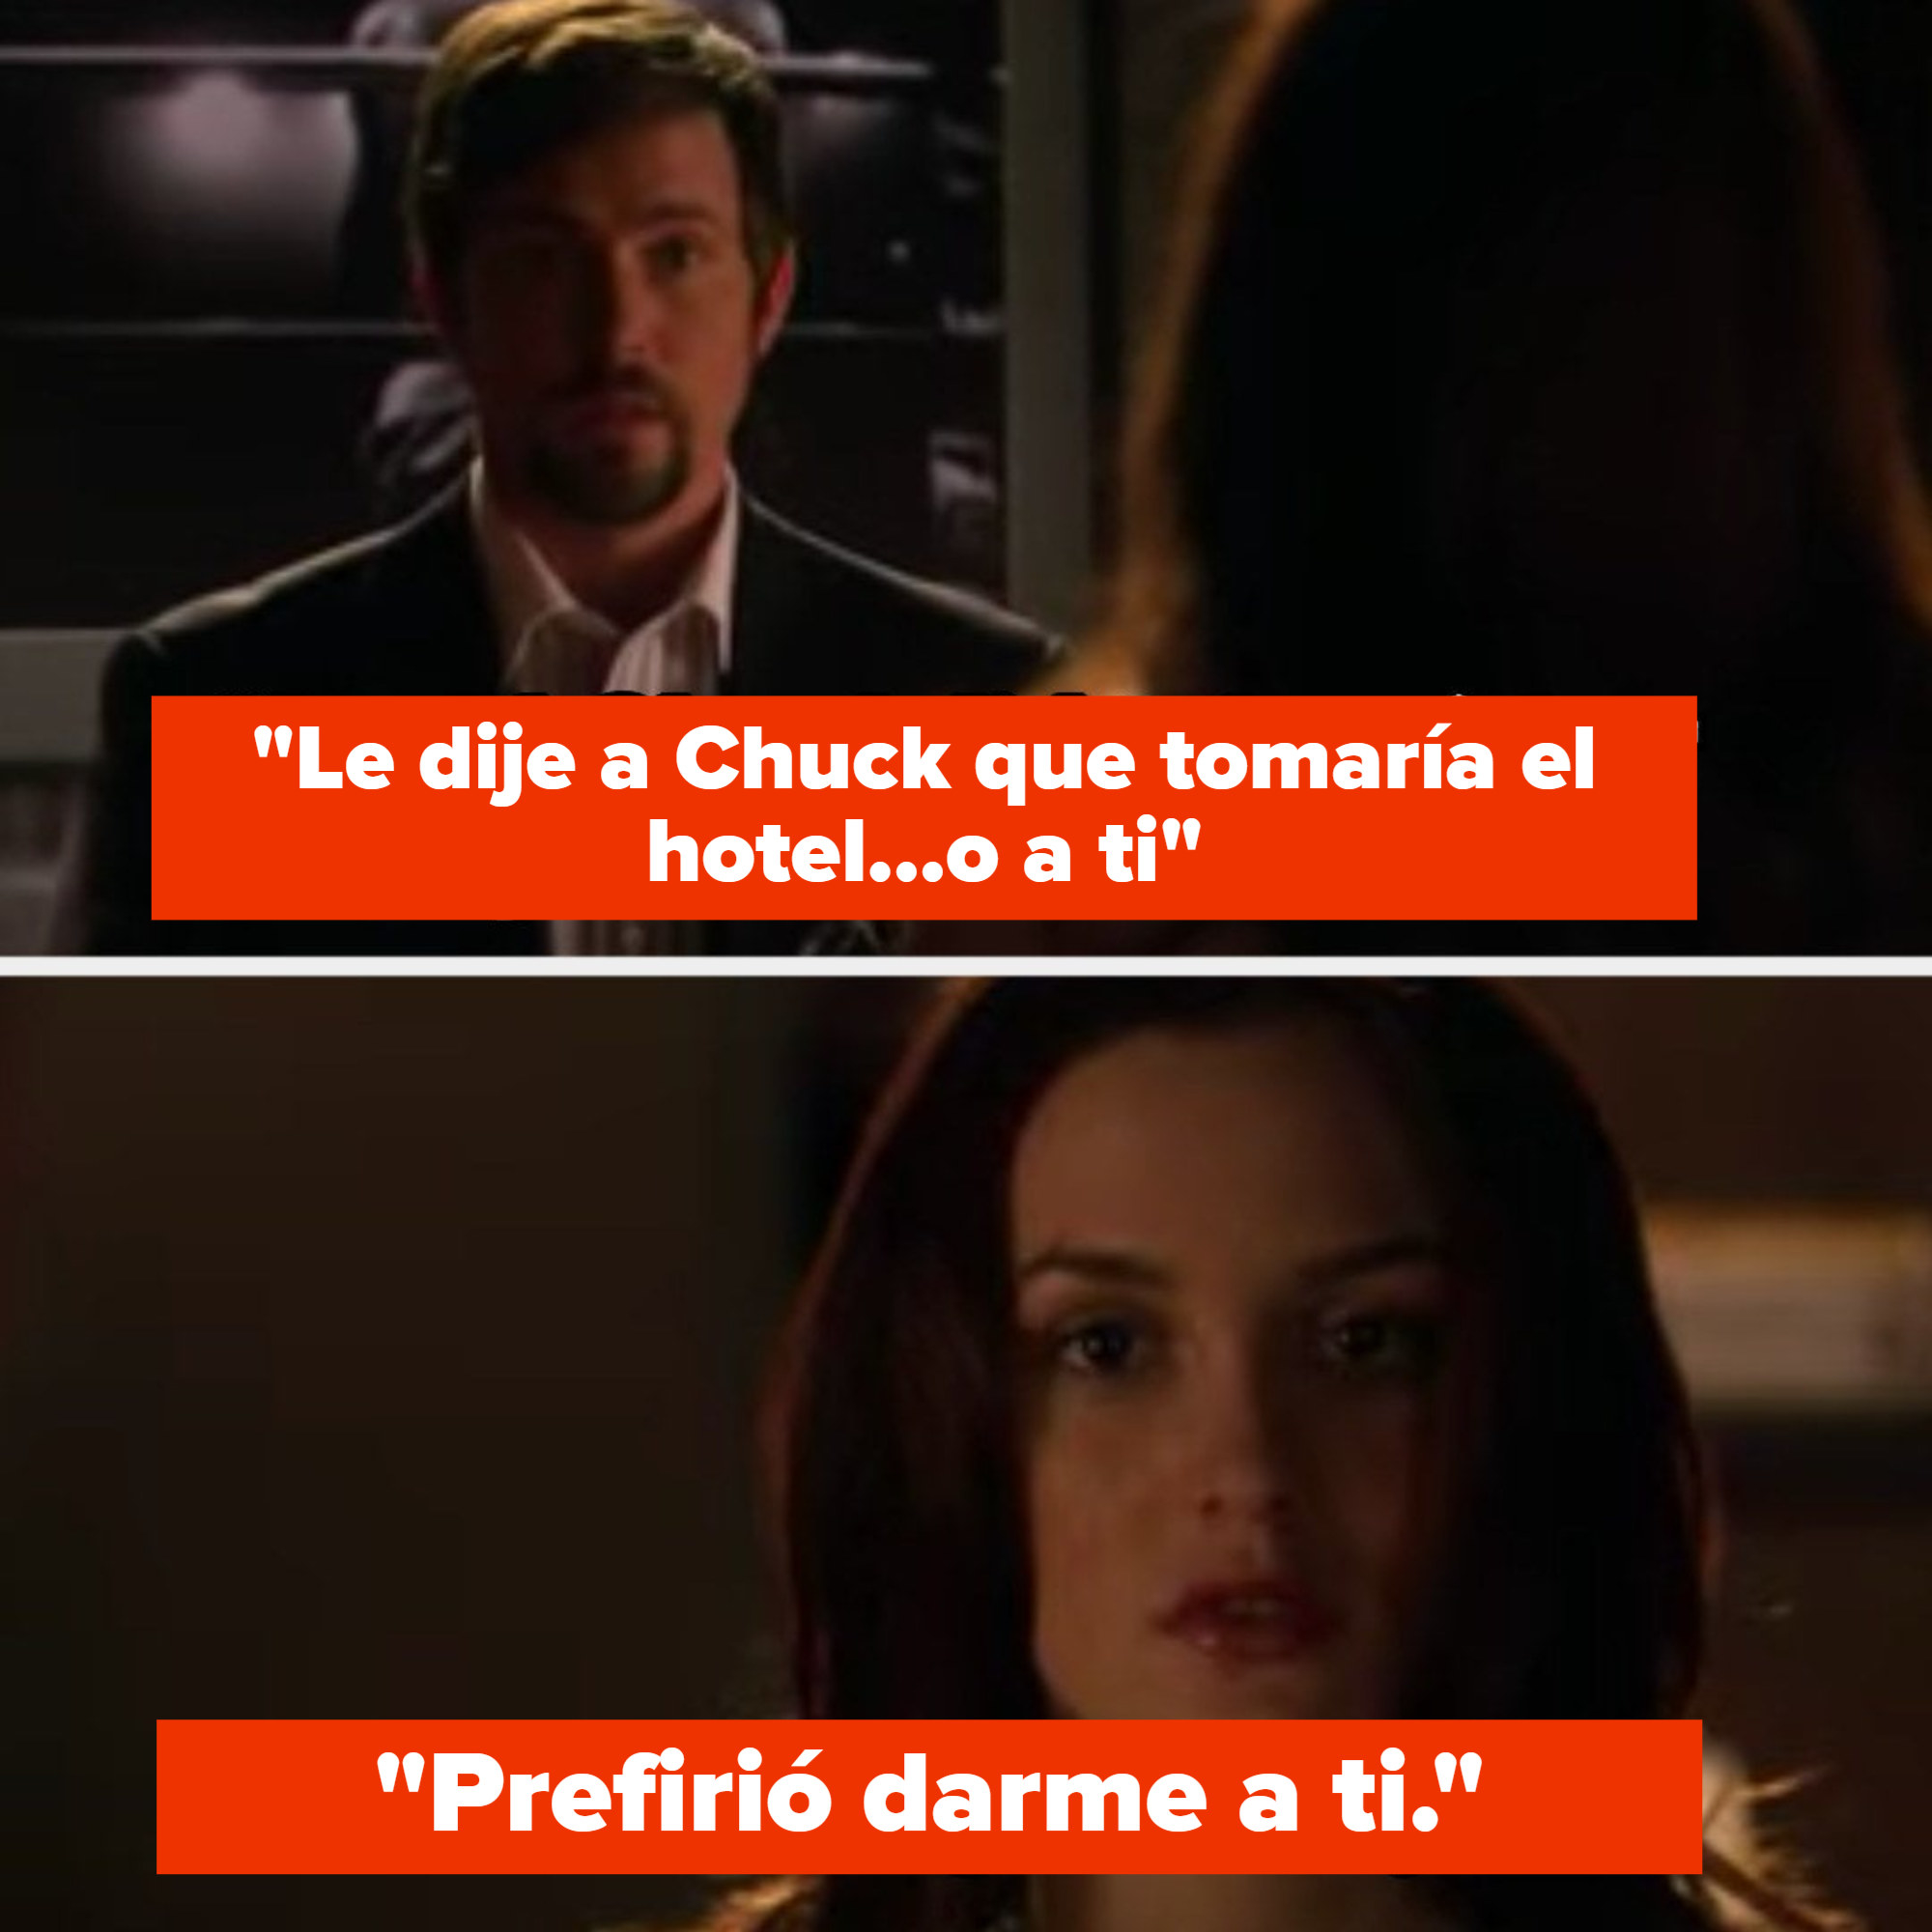 Jack: &quot;I told Chuck I&#x27;d take either you or the hotel, he chose to give me you&quot;